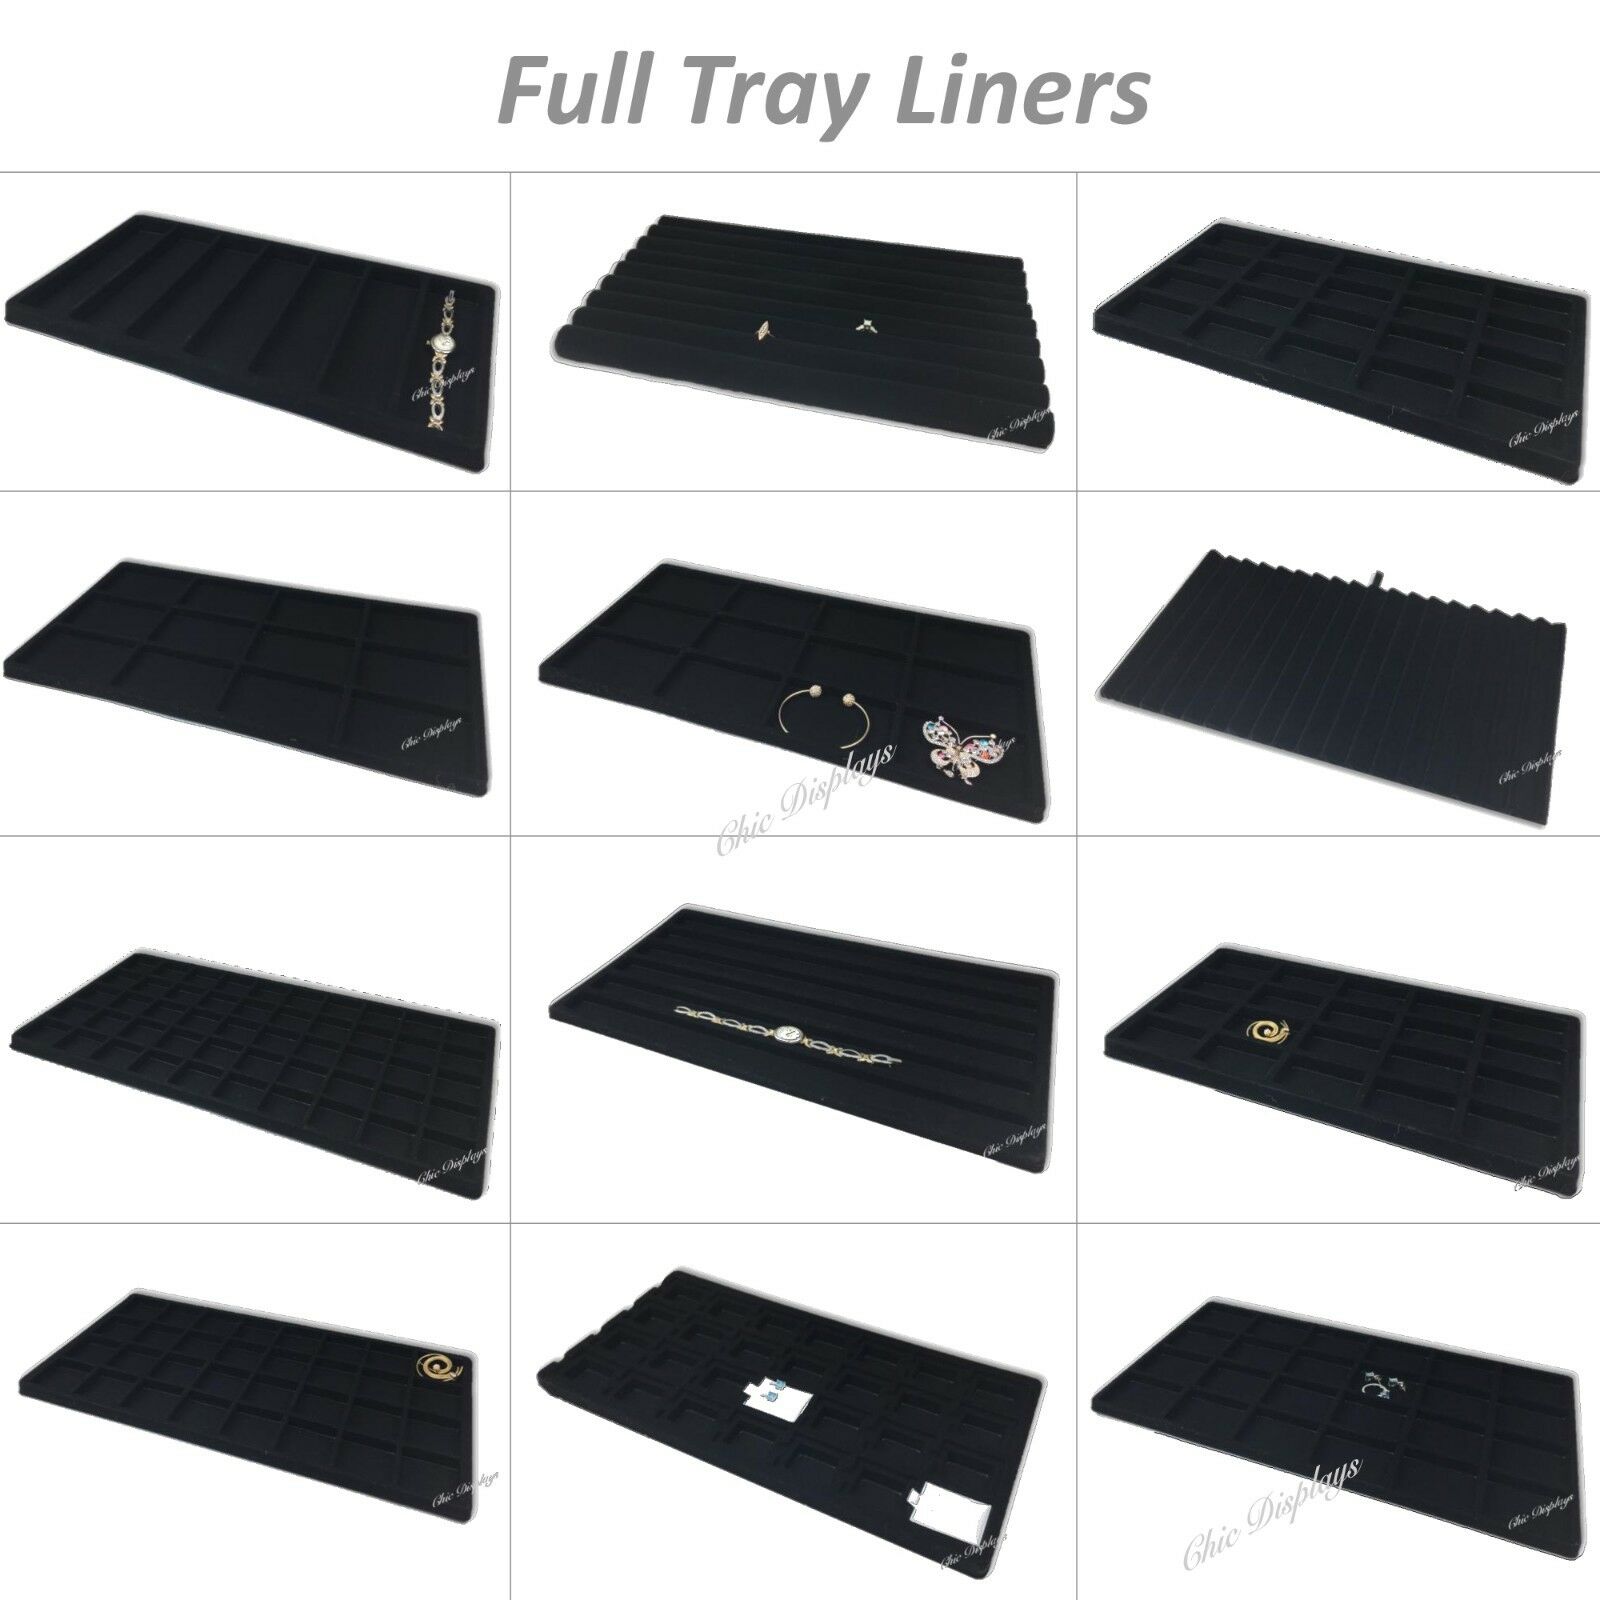 Liners Inserts For Jewelry Case Tray Liners Drawer Liners Display Inserts Lot Of